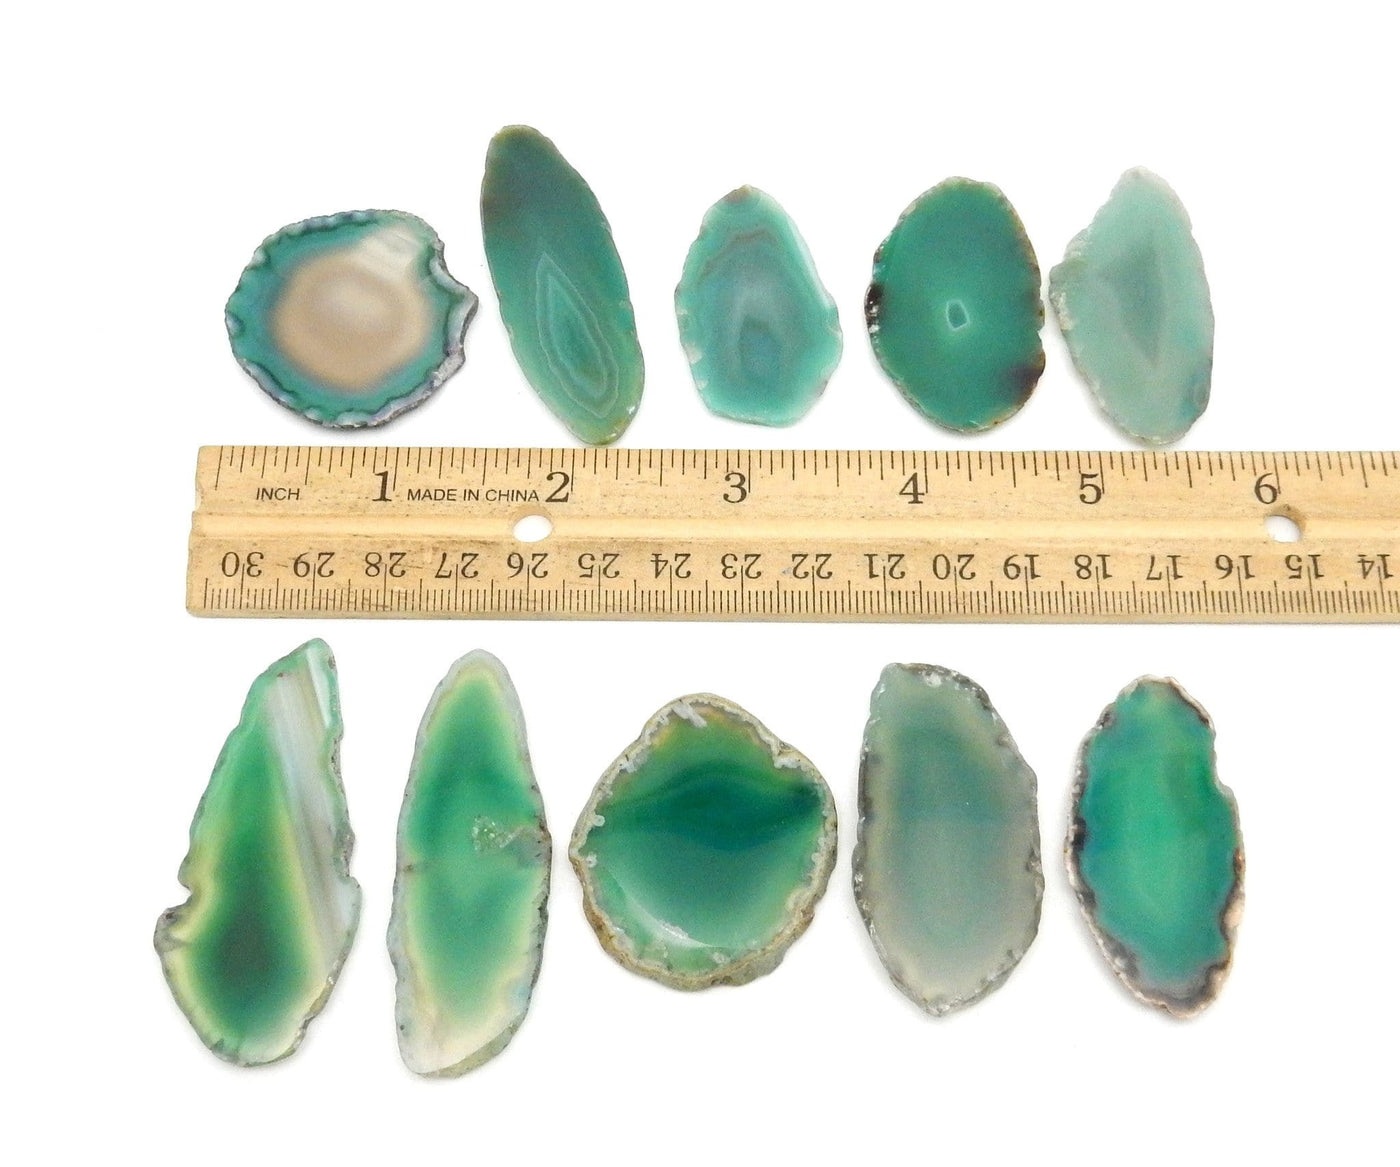 Agate Slices - Green Agate Slices - 2 rows of 5 by a ruler